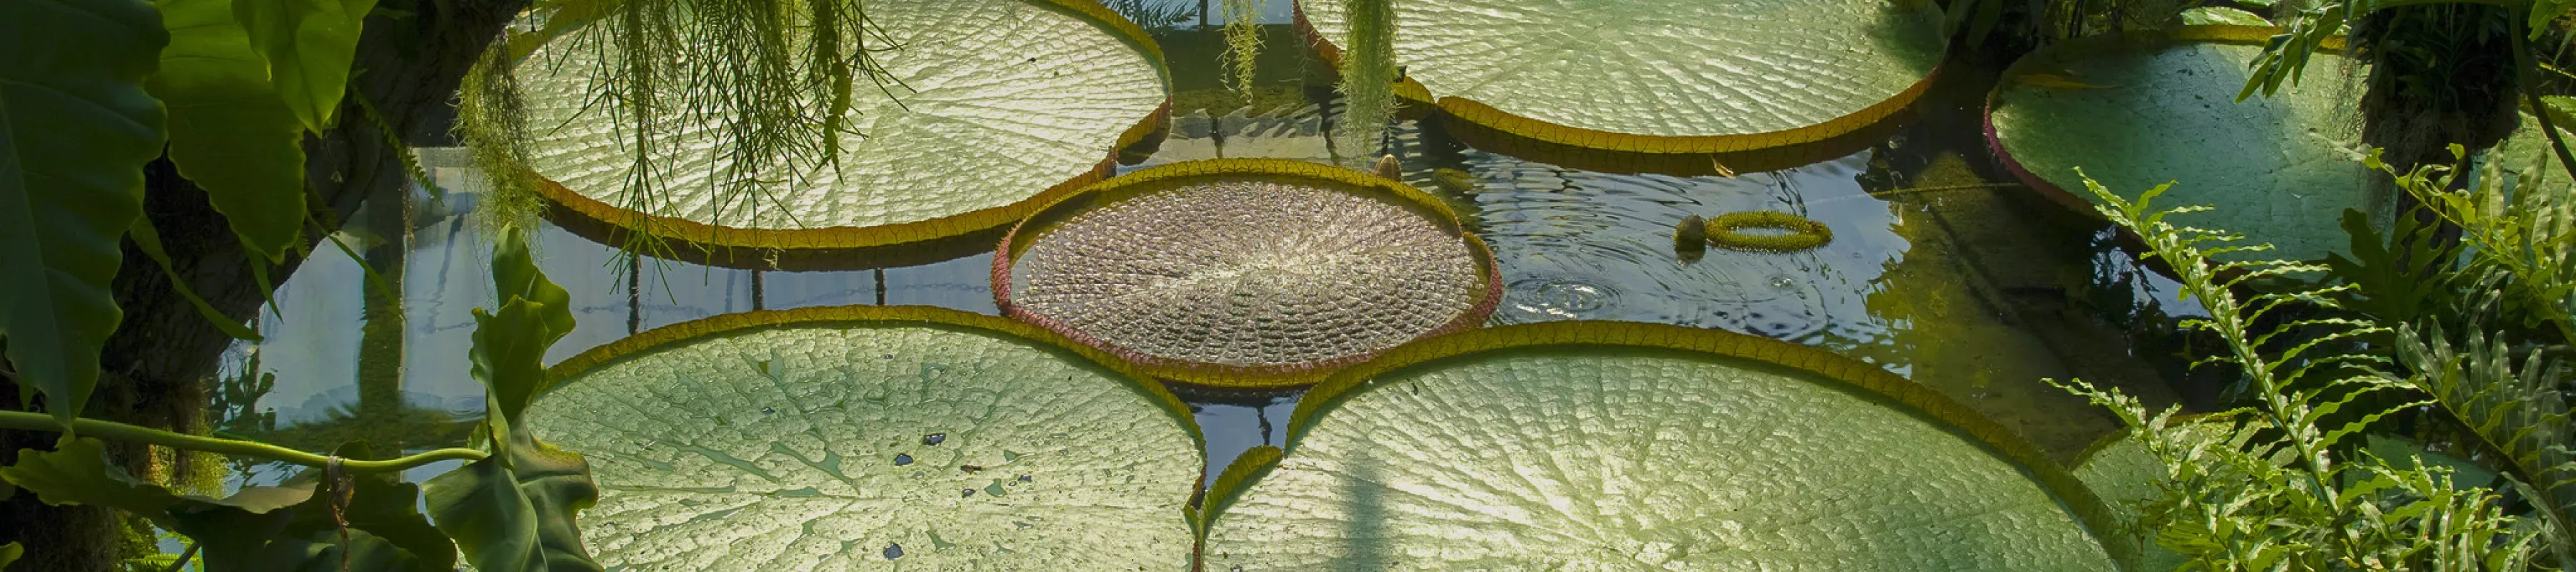 Victoria Amazonica waterlily in the Princess of Wales Conservatory